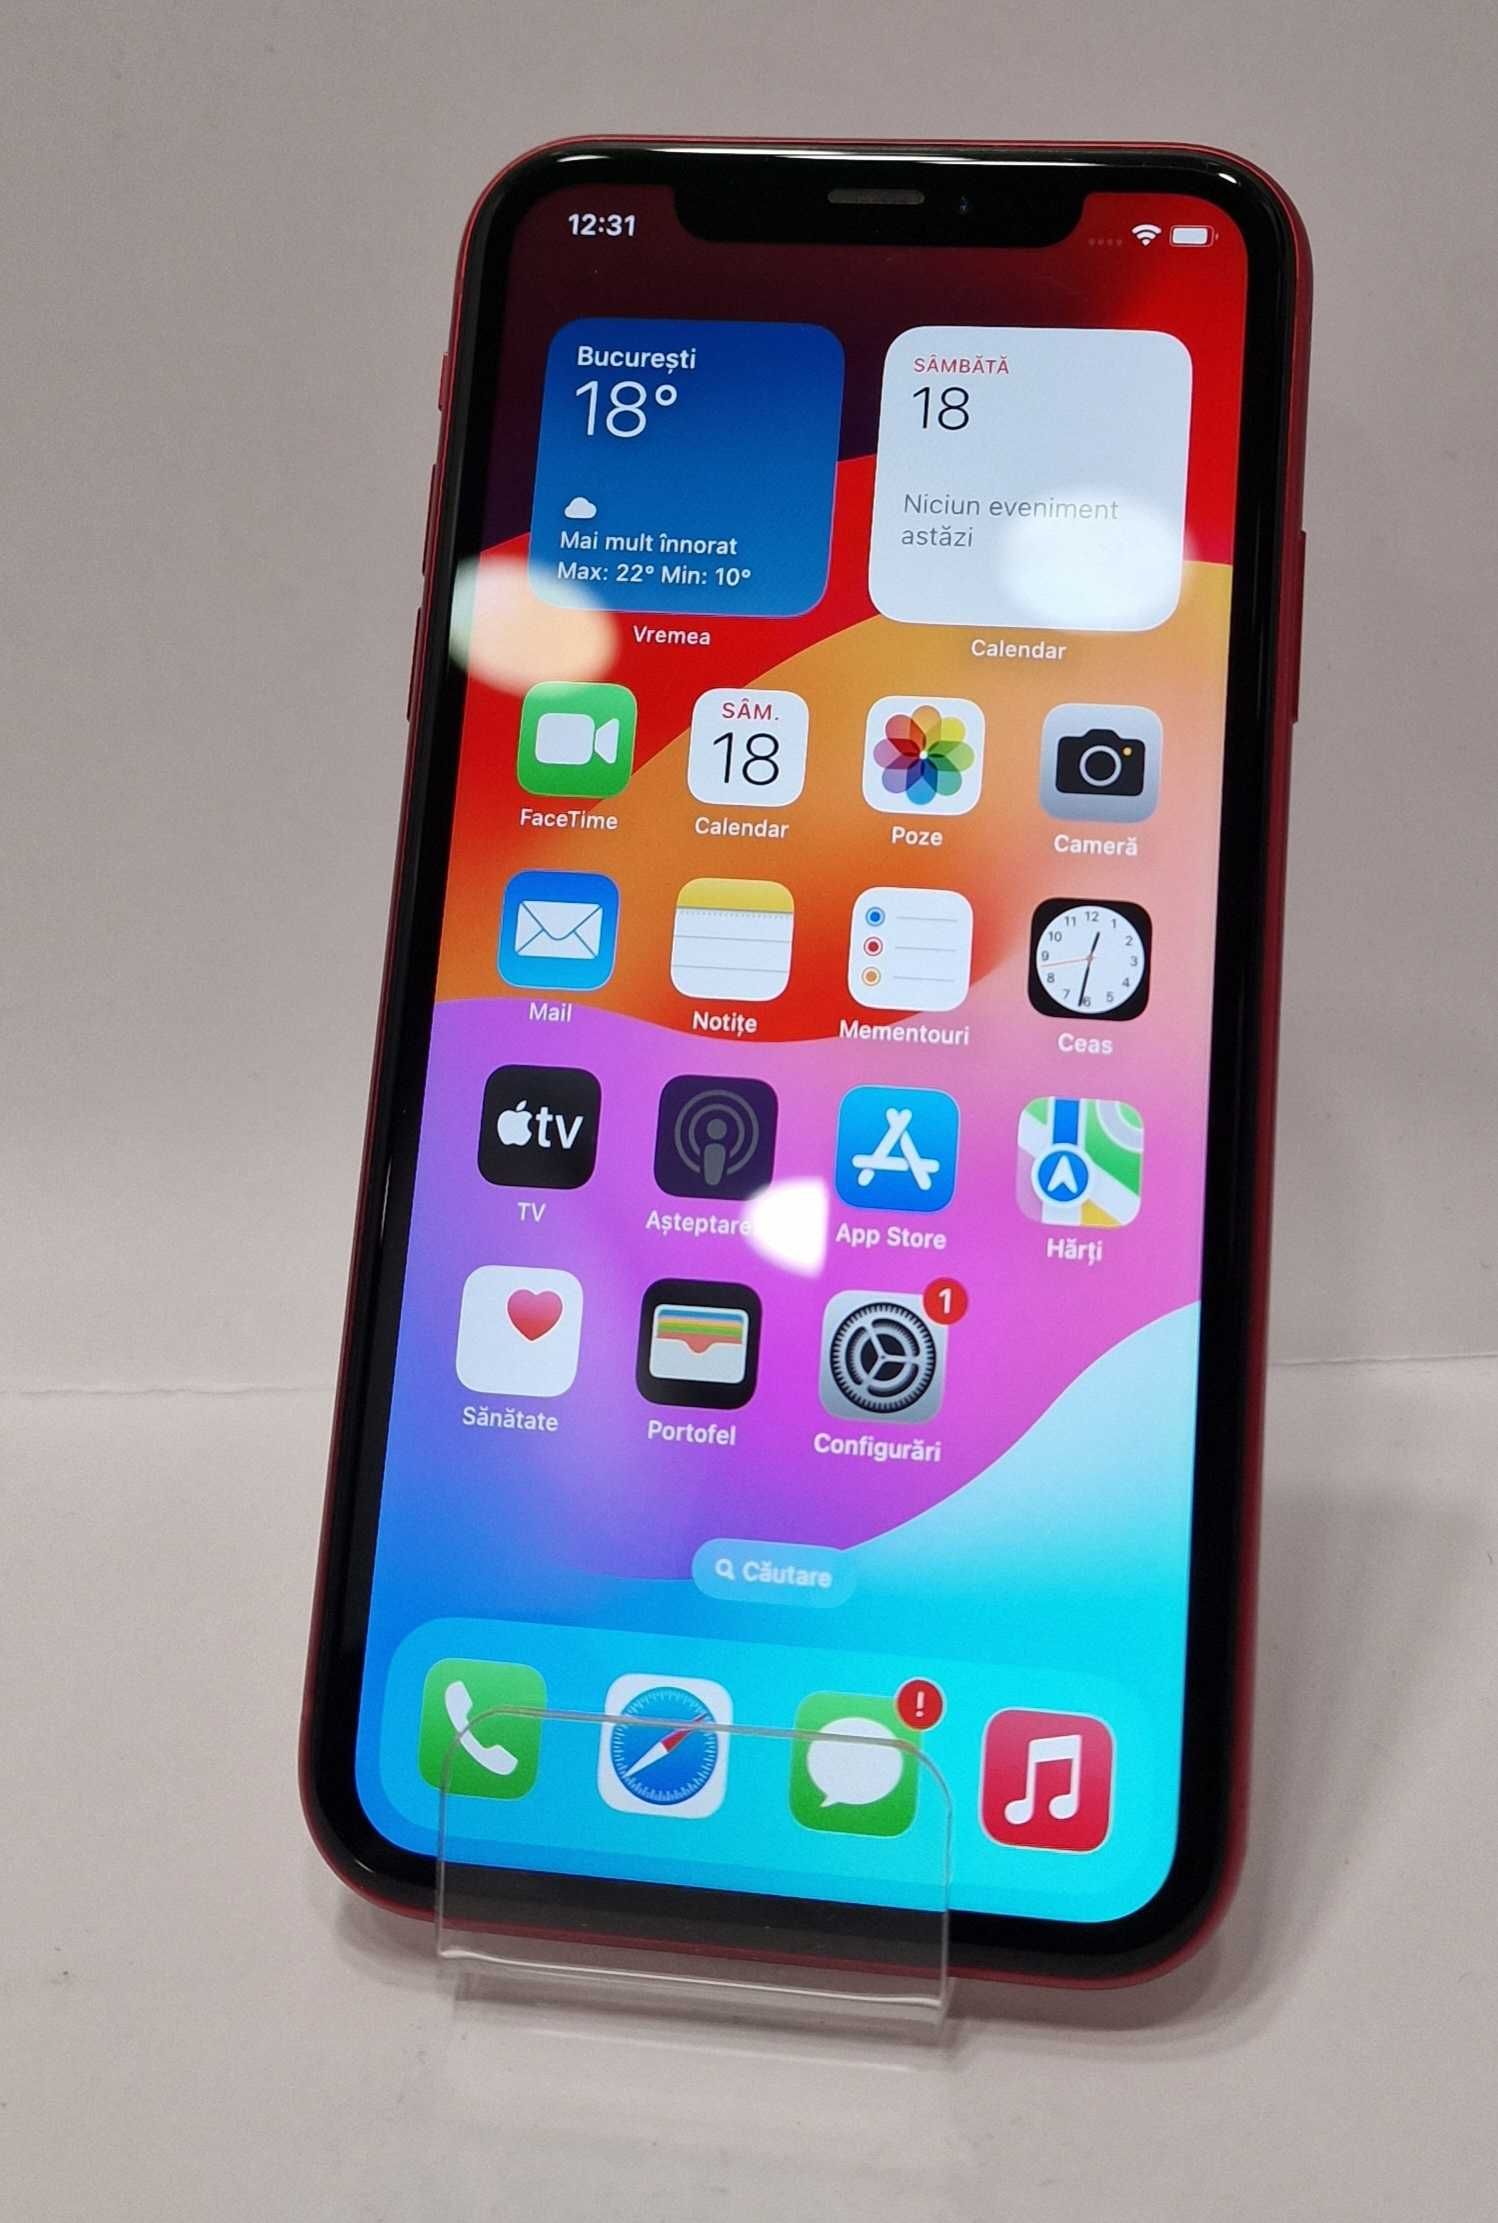 Hope Amanet P4 IPhone XR / 64 GB Product RED